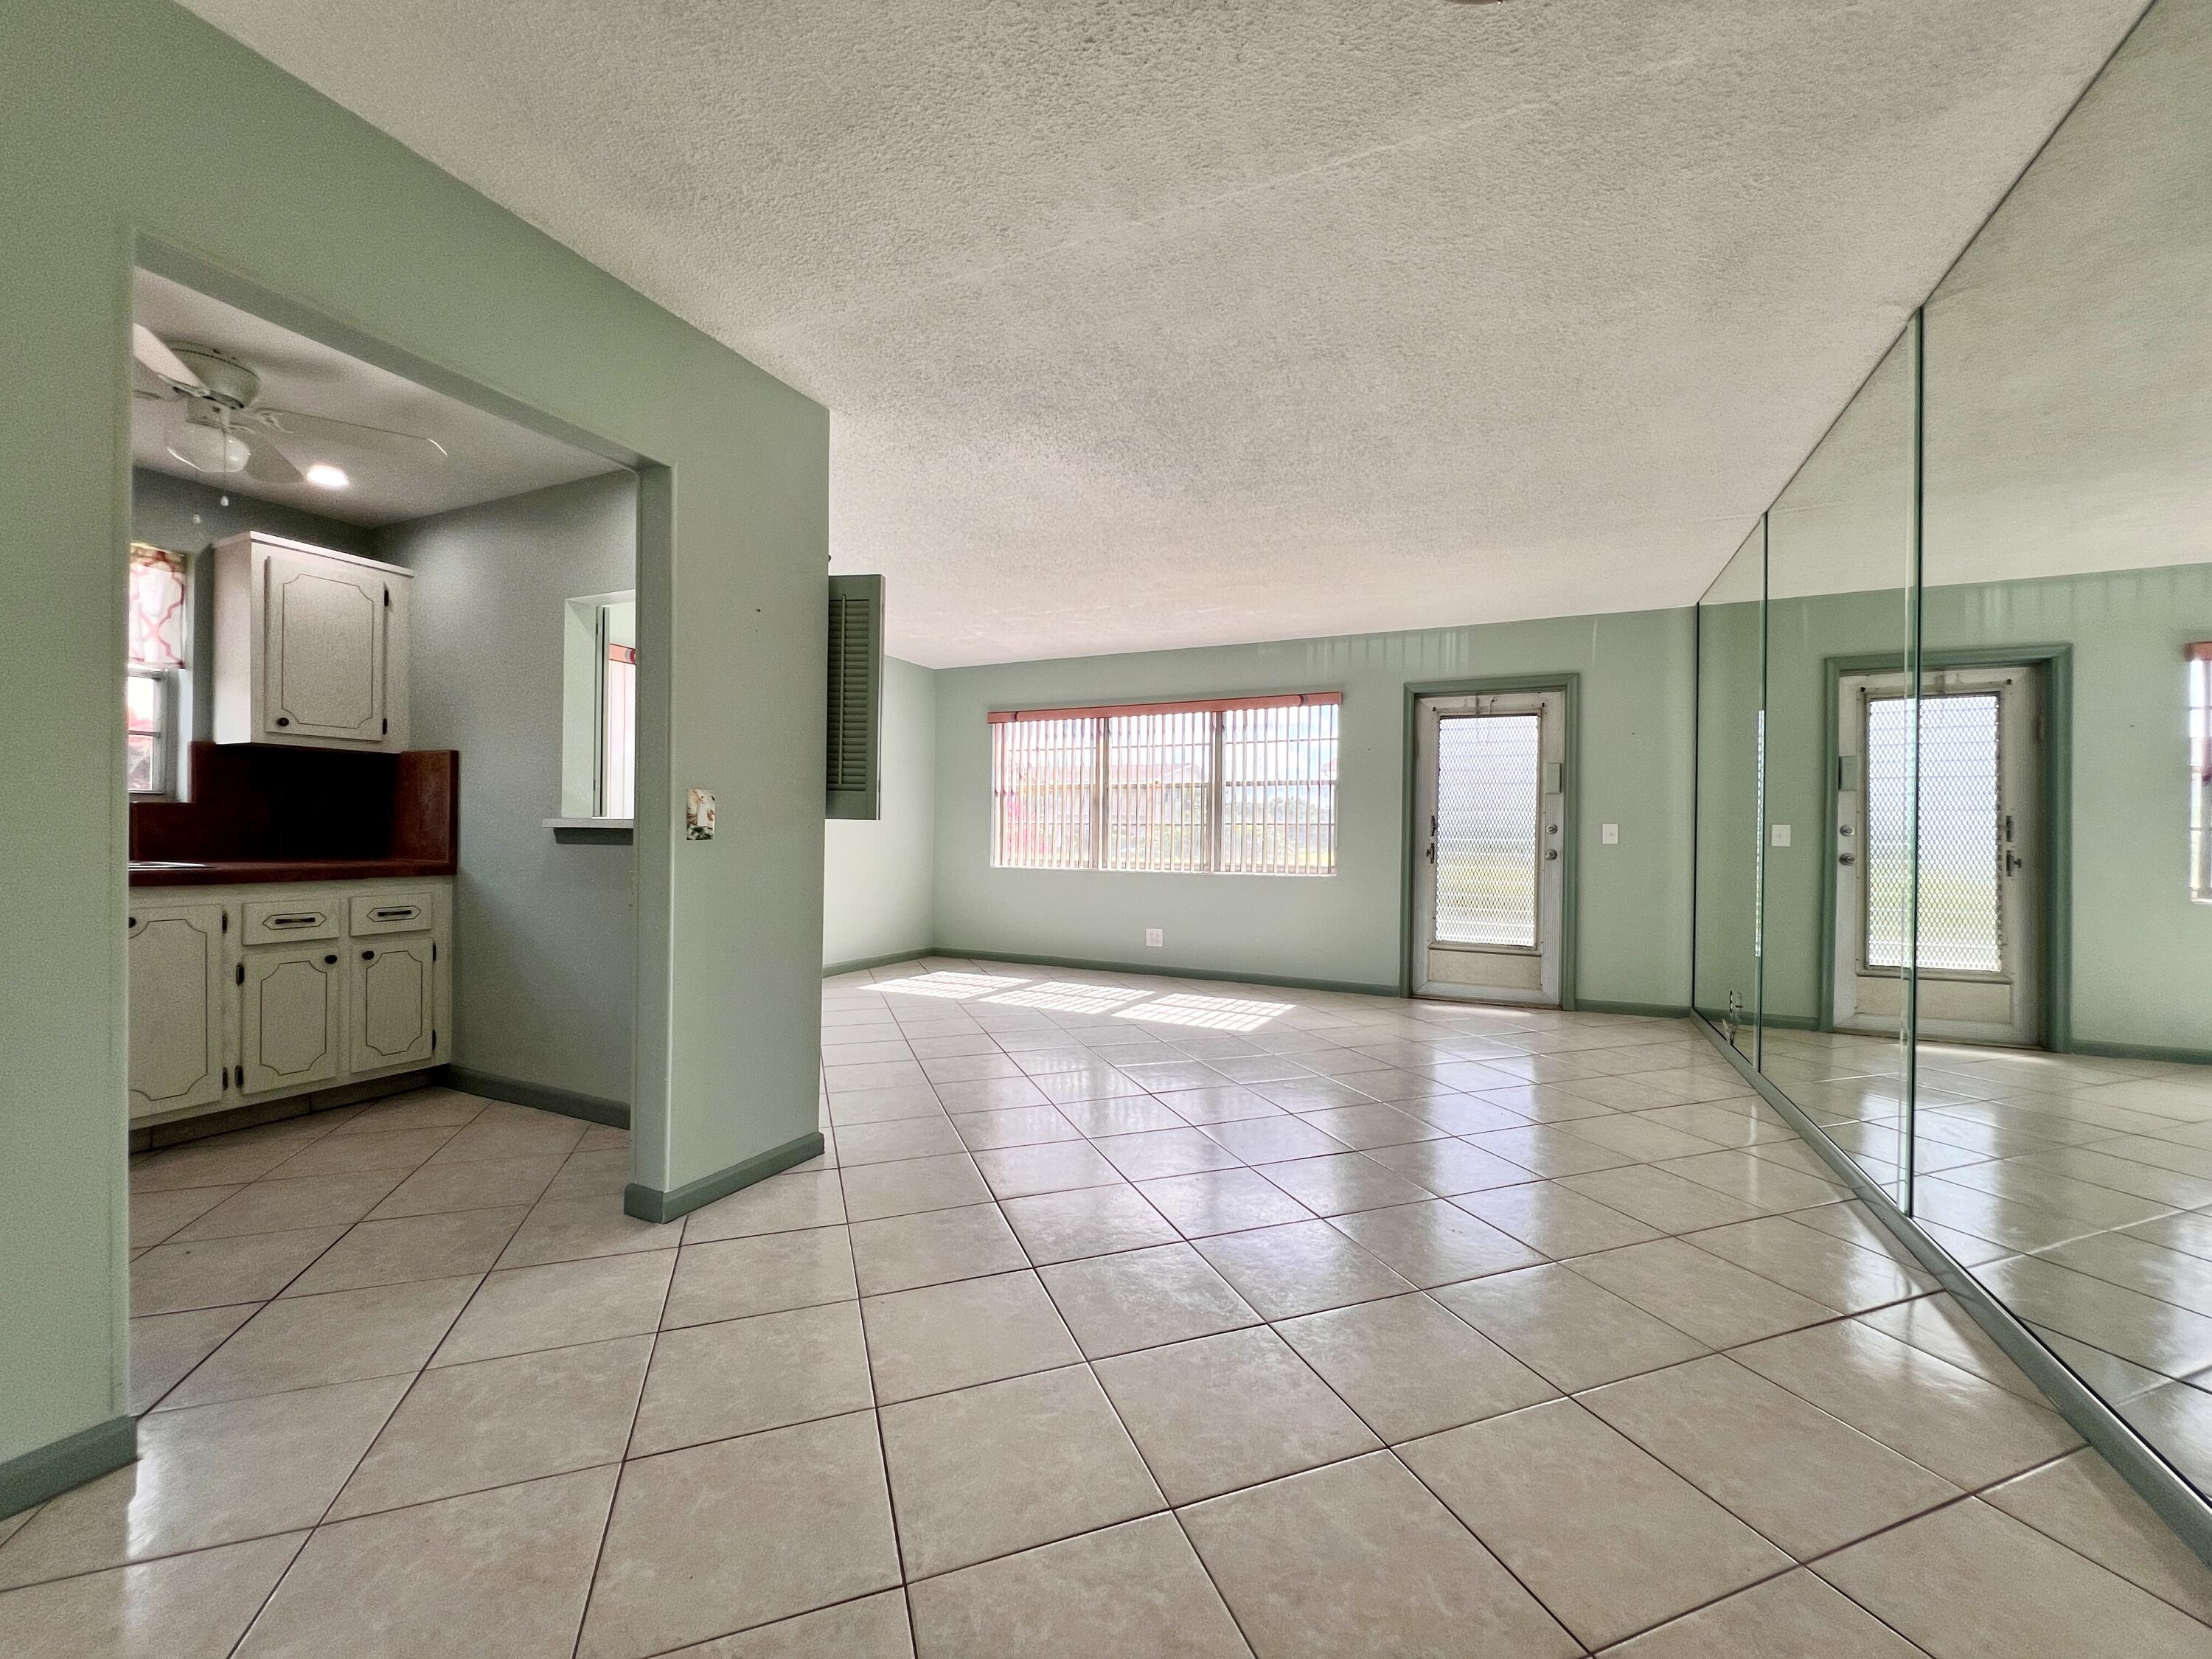 Property for Sale at 106 Berkshire, West Palm Beach, Palm Beach County, Florida - Bedrooms: 1 
Bathrooms: 1.5  - $114,000